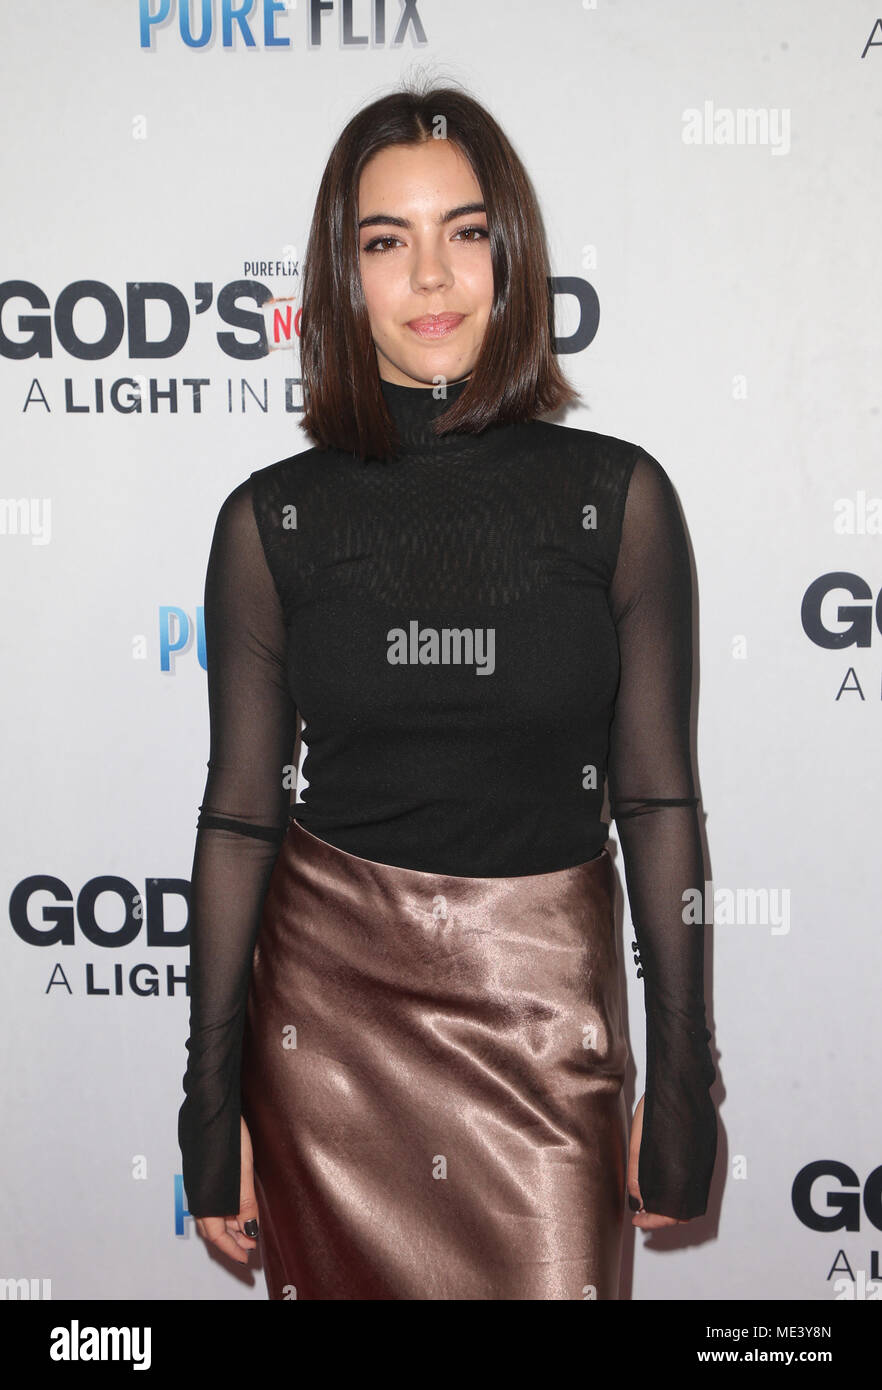 'God's Not Dead: A Light In Darkness' Premiere - Arrivals  Featuring: Samantha Boscarino Where: Hollywood, California, United States When: 20 Mar 2018 Credit: FayesVision/WENN.com Stock Photo